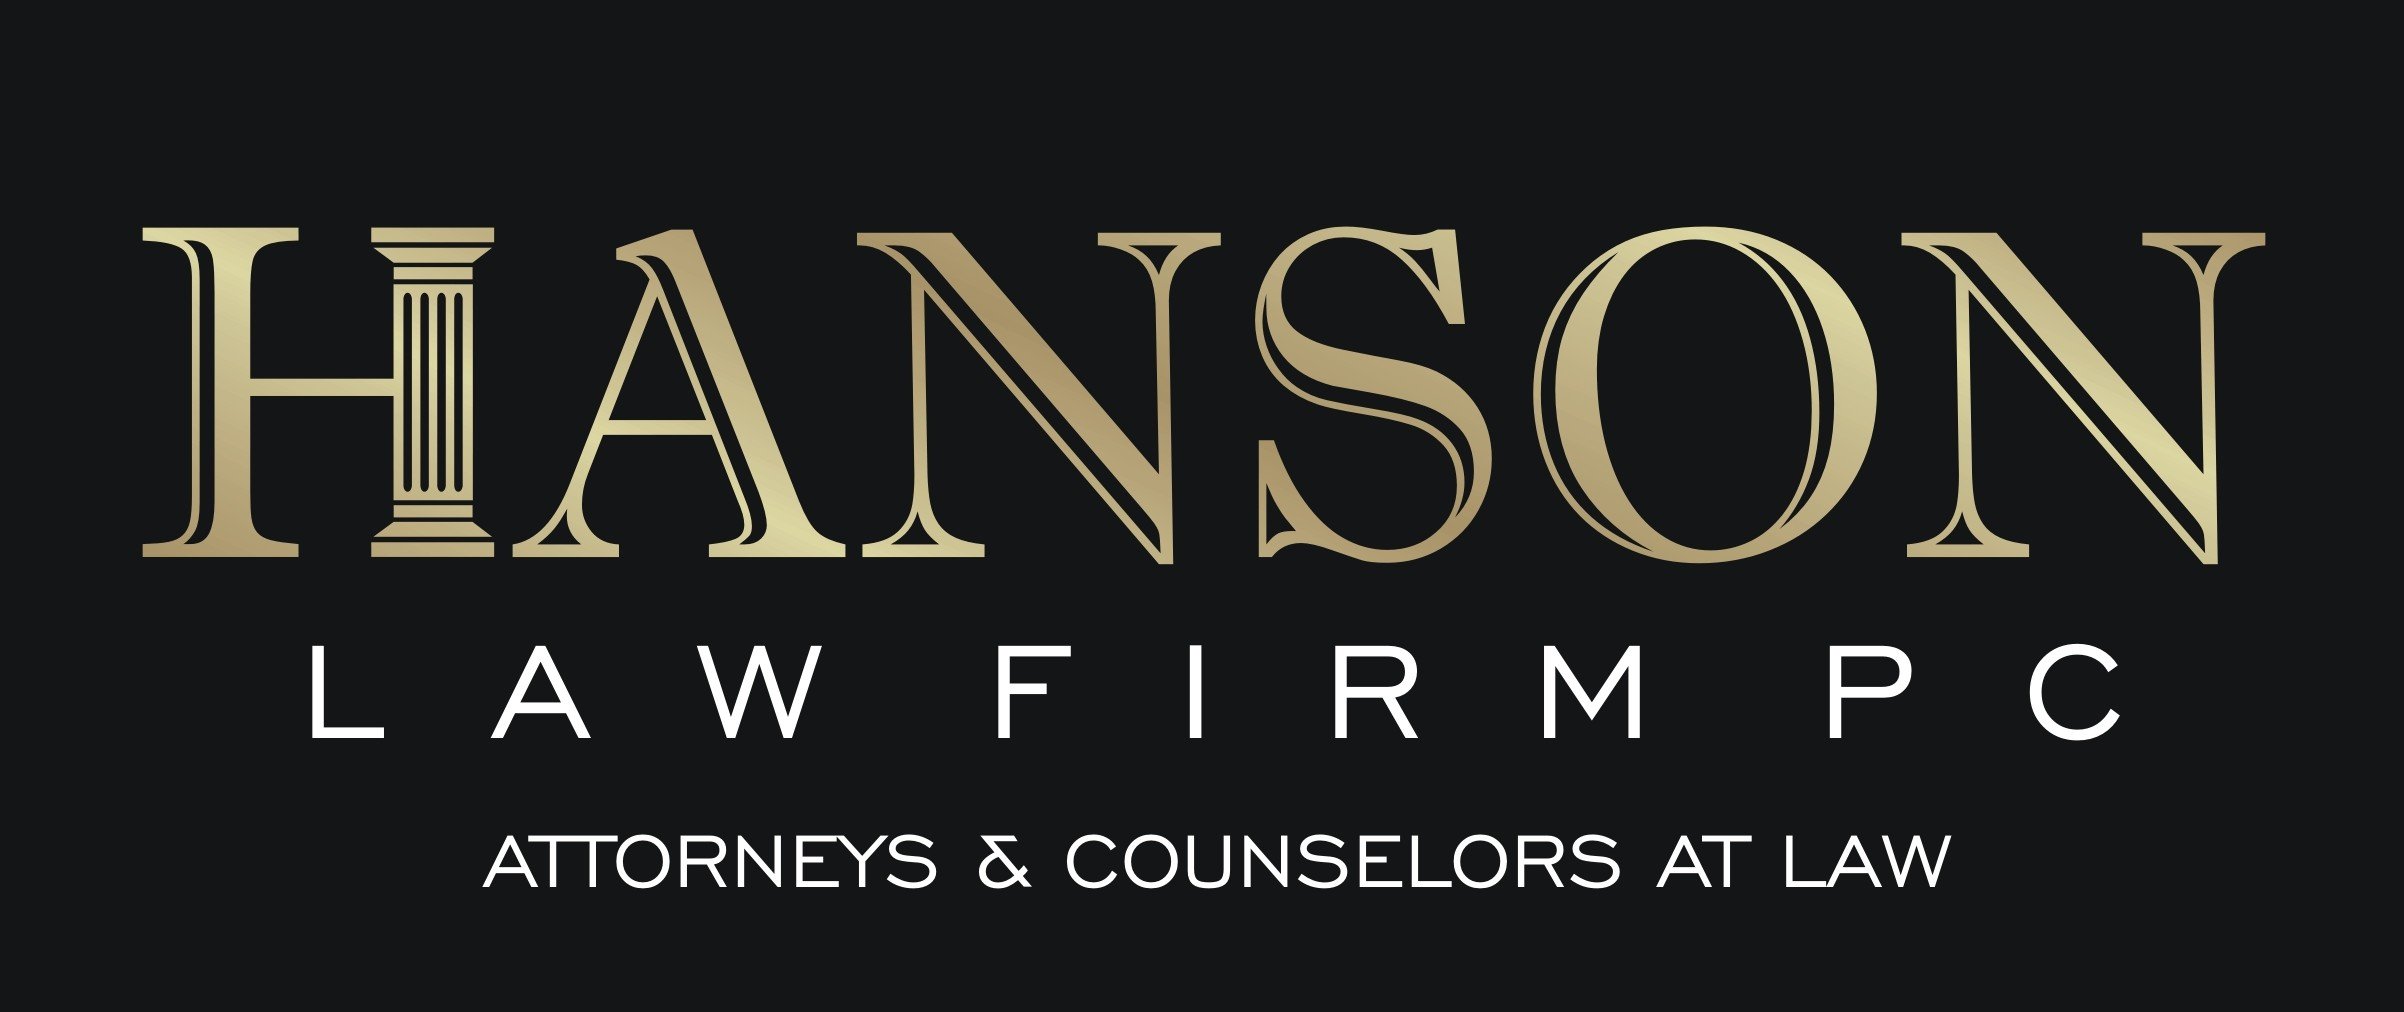 Hanson Law Firm P C | Attorneys & Counselors At Law